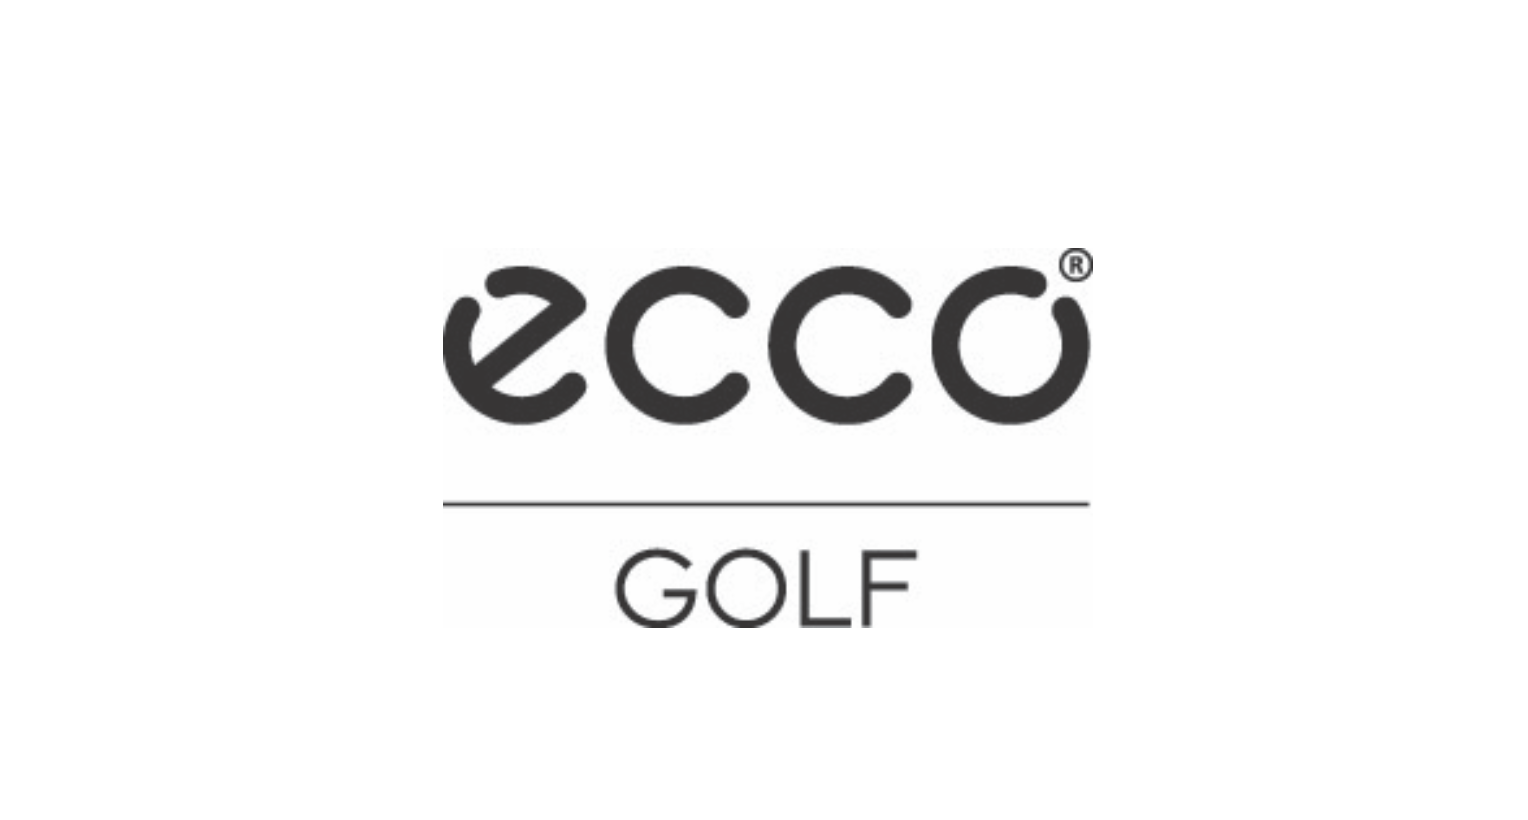 ECCO GOLF Updates for Autumn / Winter 2020 Collection